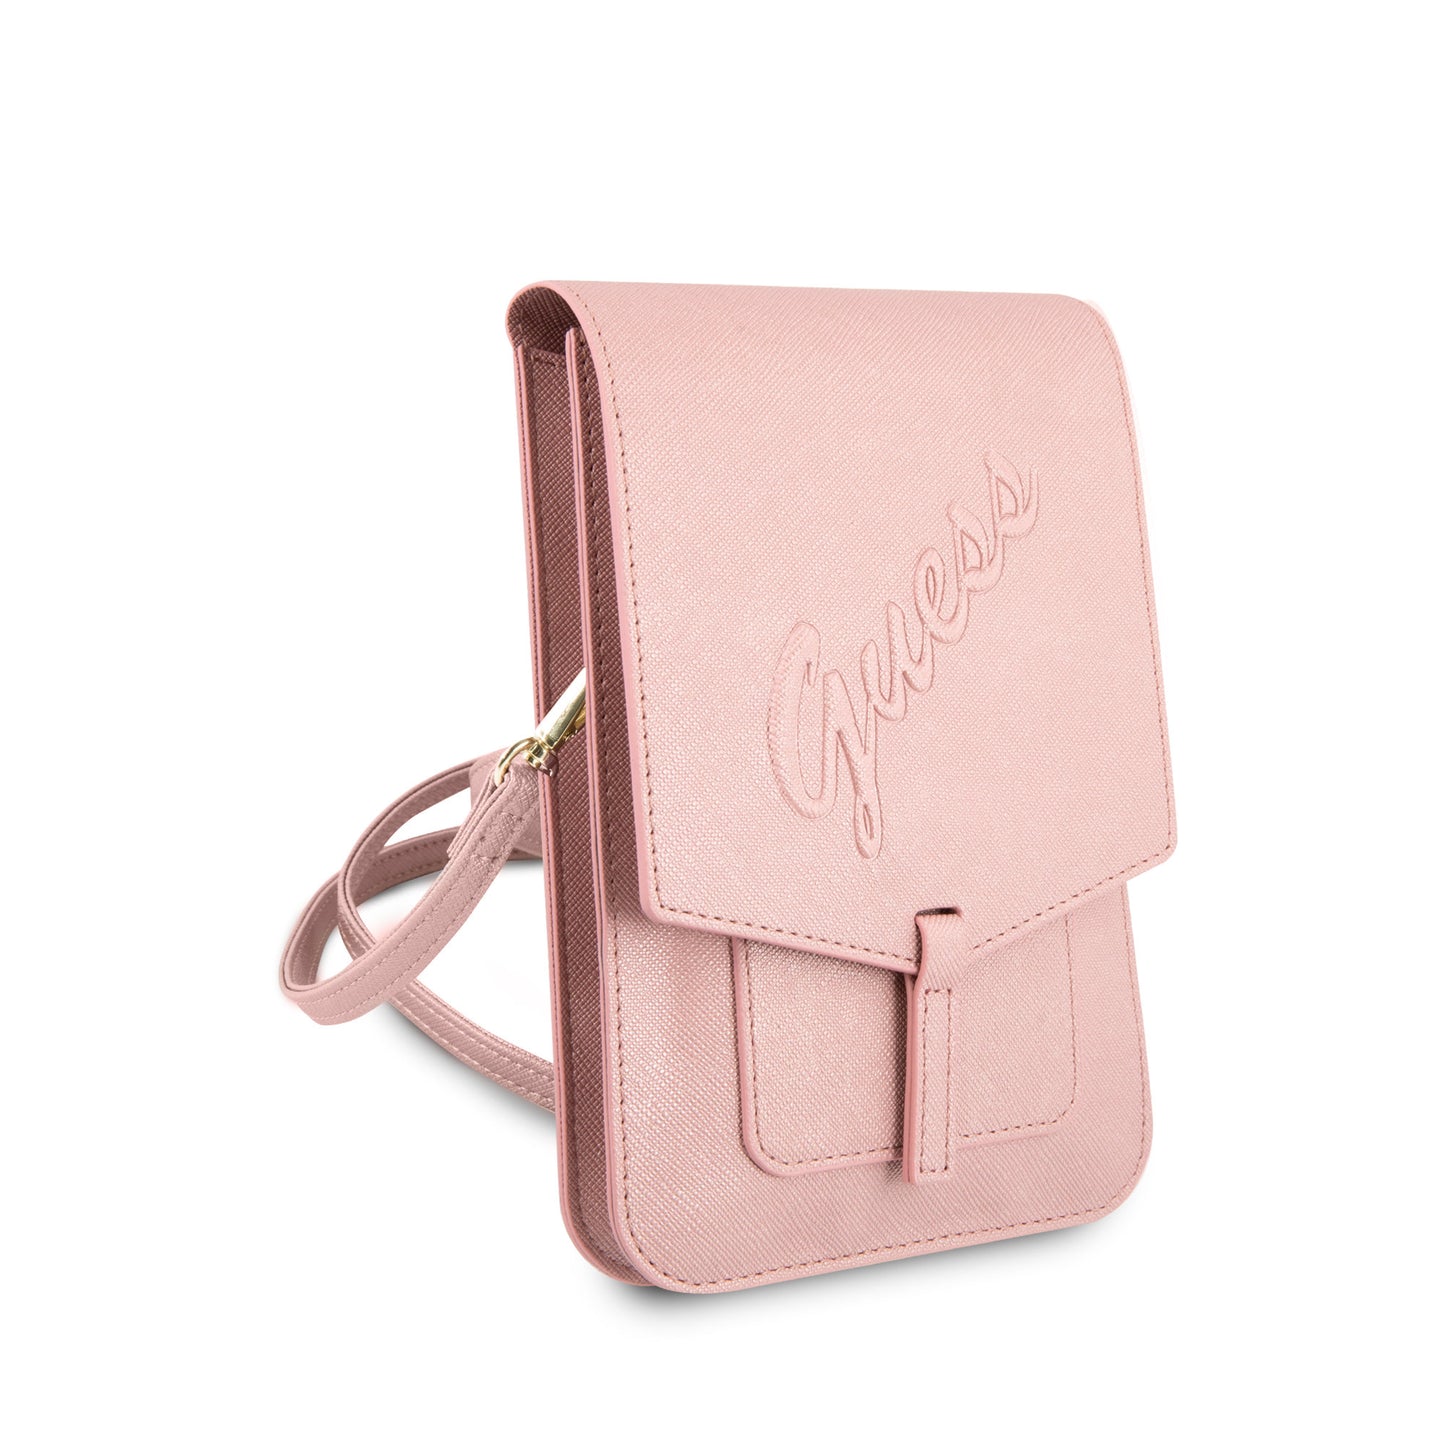 Guess 7 inch PU Leather Heuptas - Wallet bag - Roze